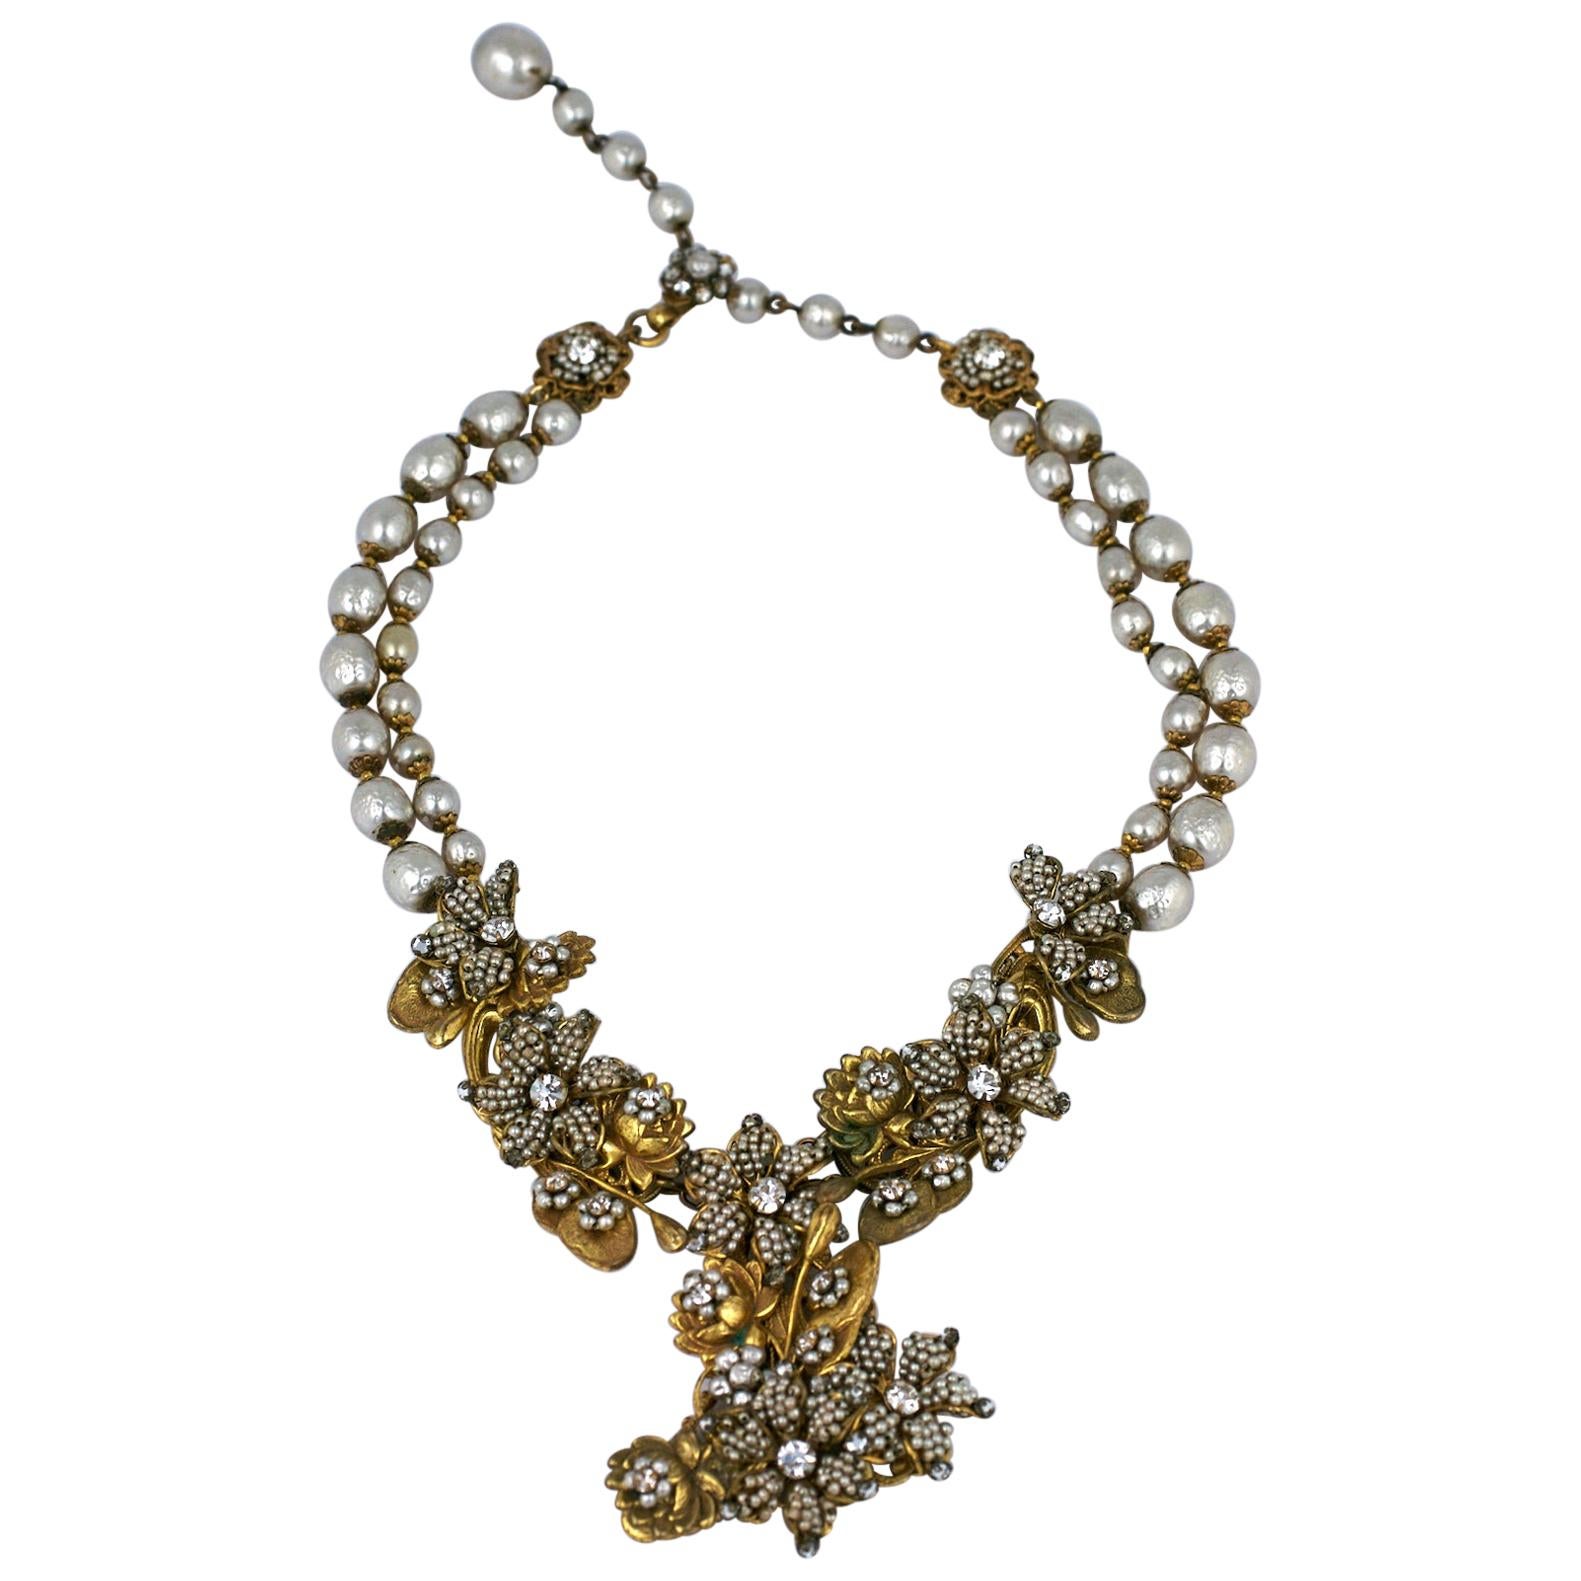 Collector Quality Micro Pearl Miriam Haskell Necklace